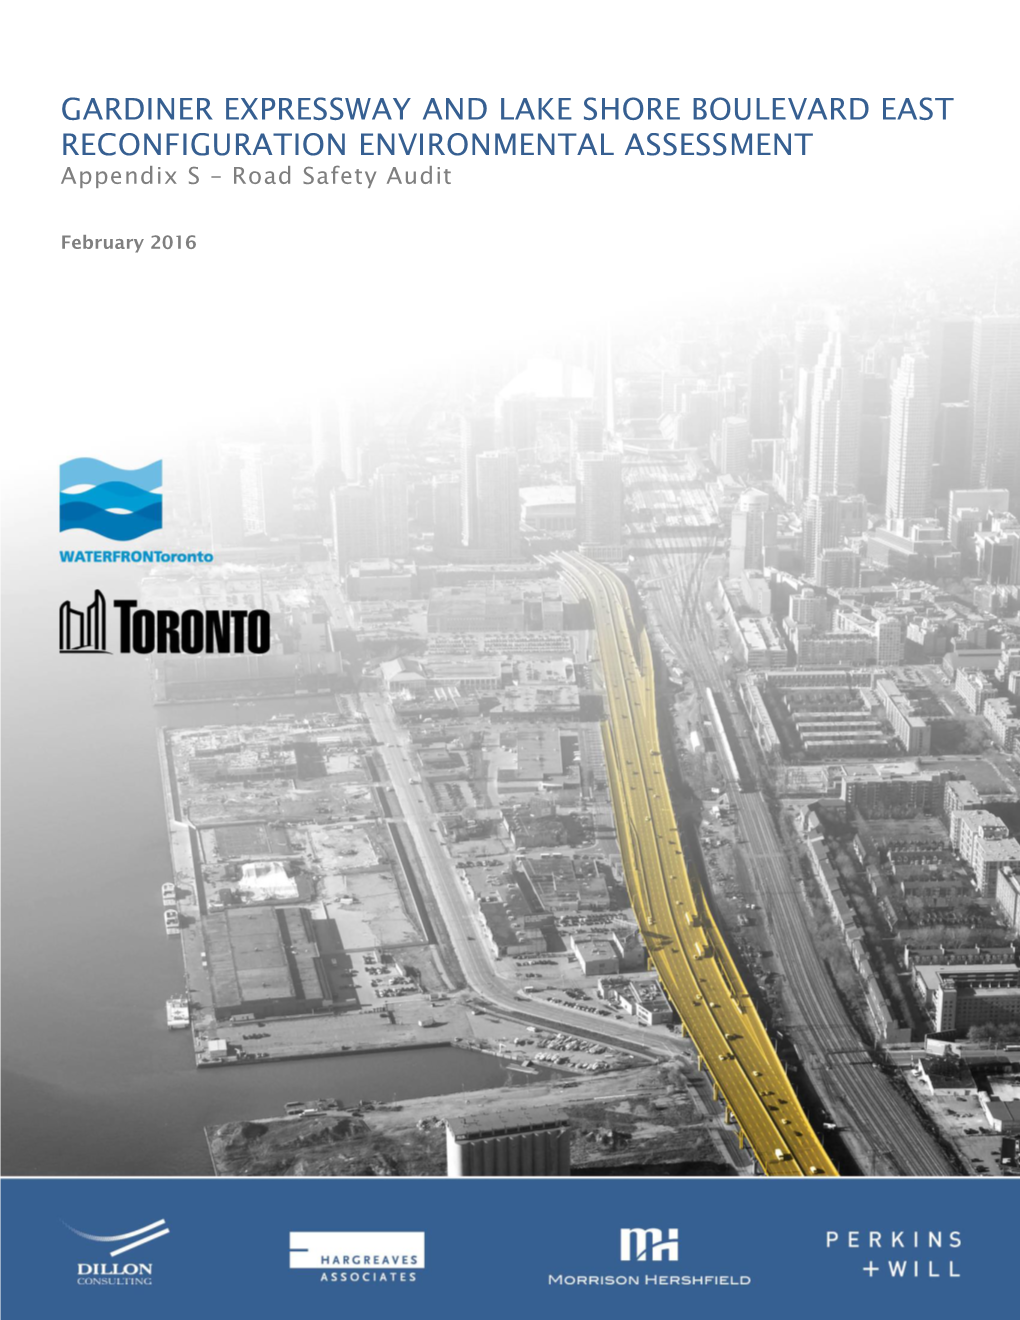 GARDINER EXPRESSWAY and LAKE SHORE BOULEVARD EAST RECONFIGURATION ENVIRONMENTAL ASSESSMENT Appendix S – Road Safety Audit